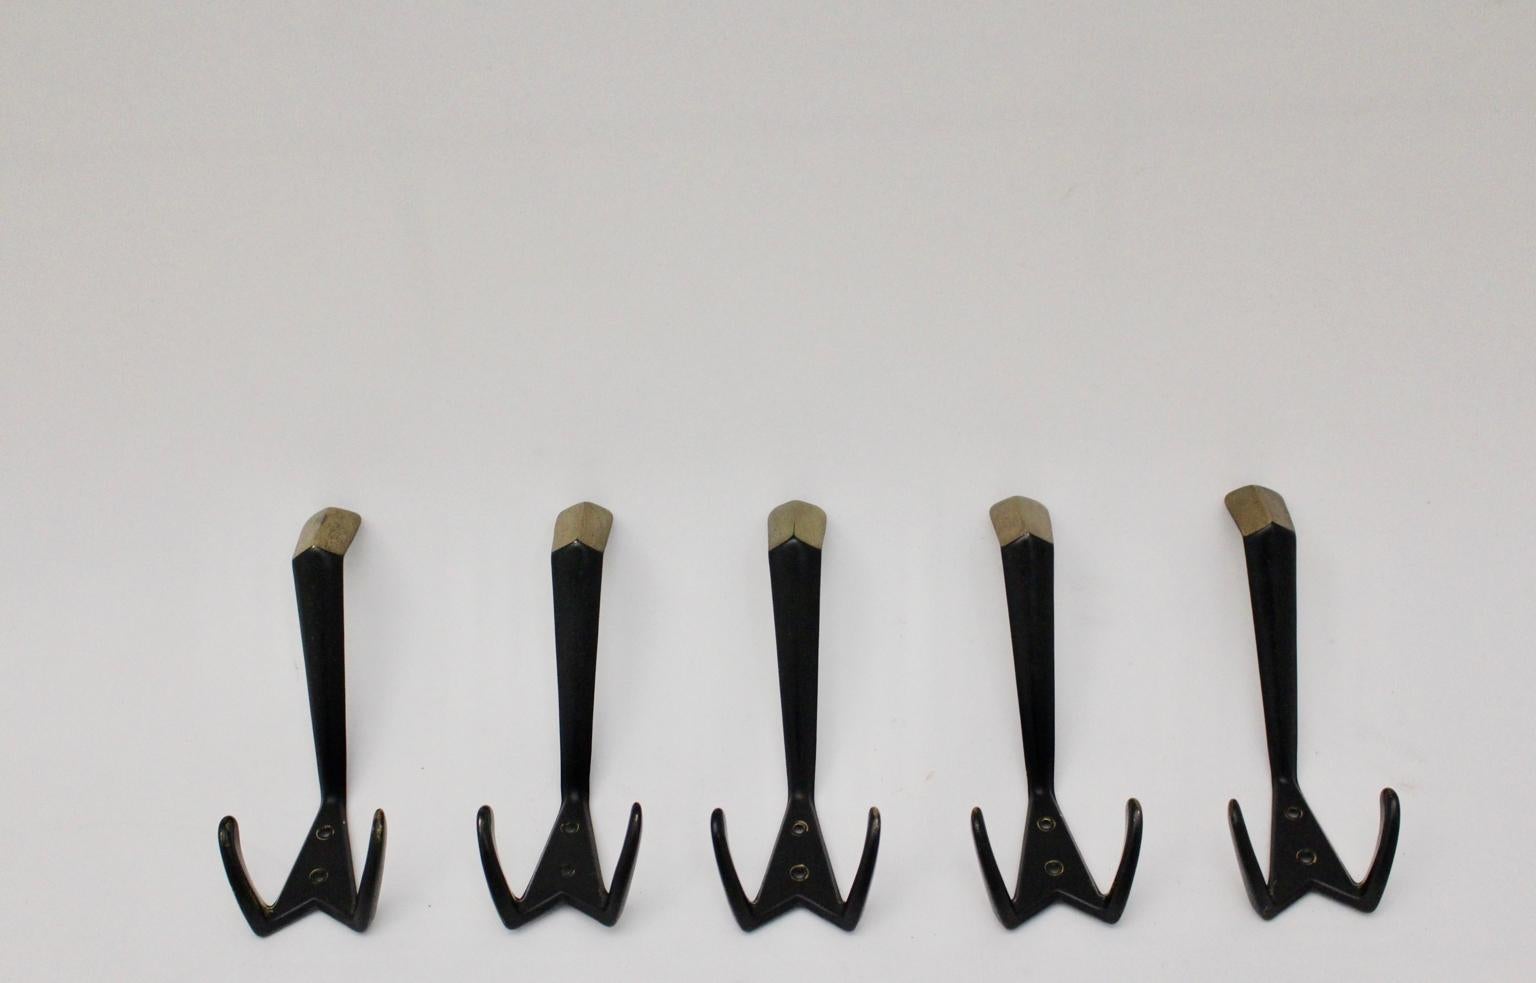 This set of five wall hooks were made of solid blackened brass.
Very good original vintage condition with minor signs of age.
Approx. measures:
Width: 6 cm
Depth: 8 cm
Height: 16 cm.